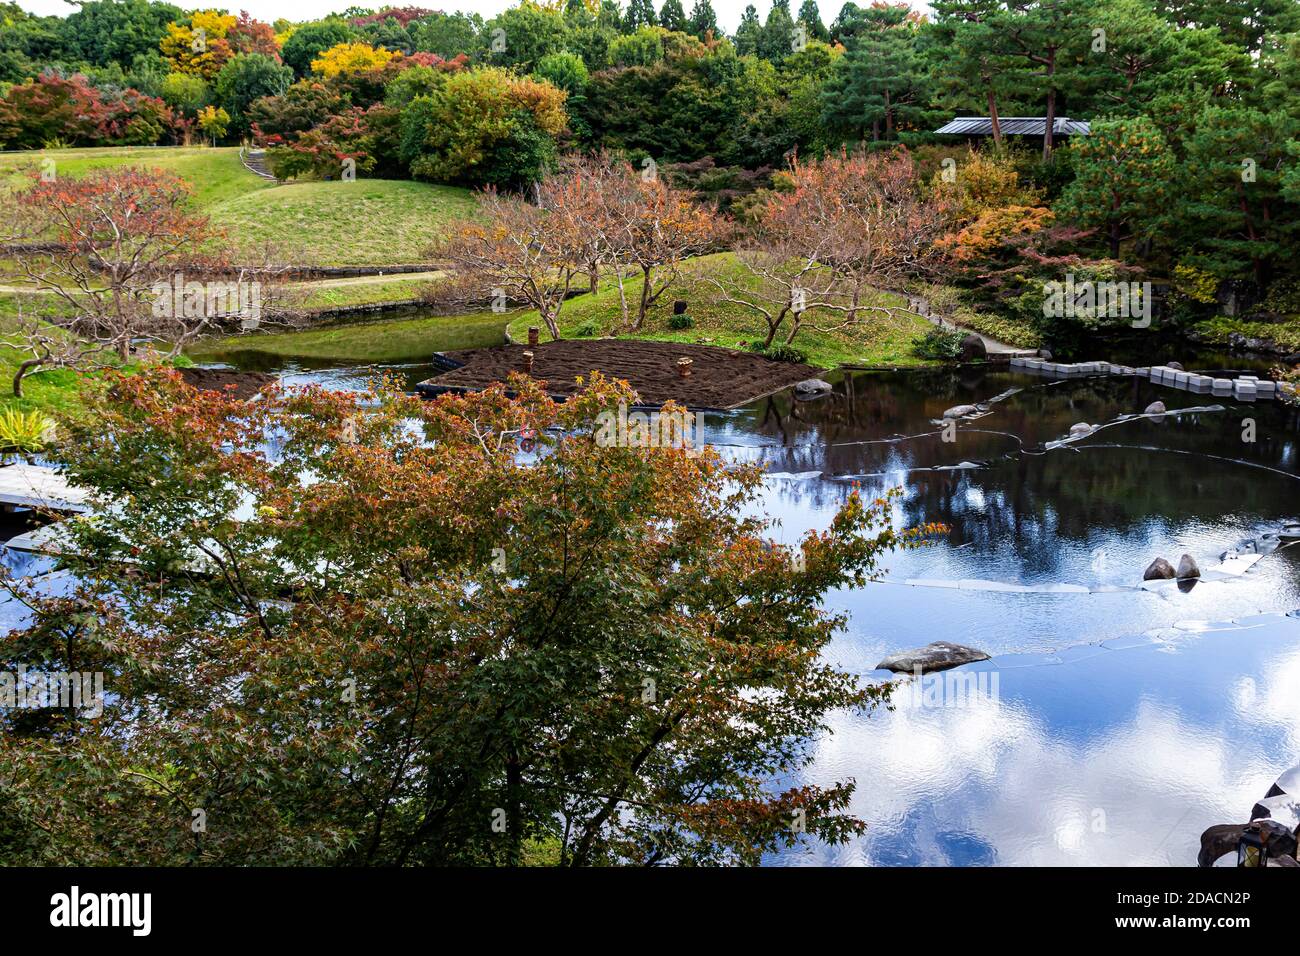 Suzaku no Niwa Garden at Umekoji Park was built to commemorate the 1200th anniversary of the Heian Period (7984-1192).  The garden features landscape Stock Photo